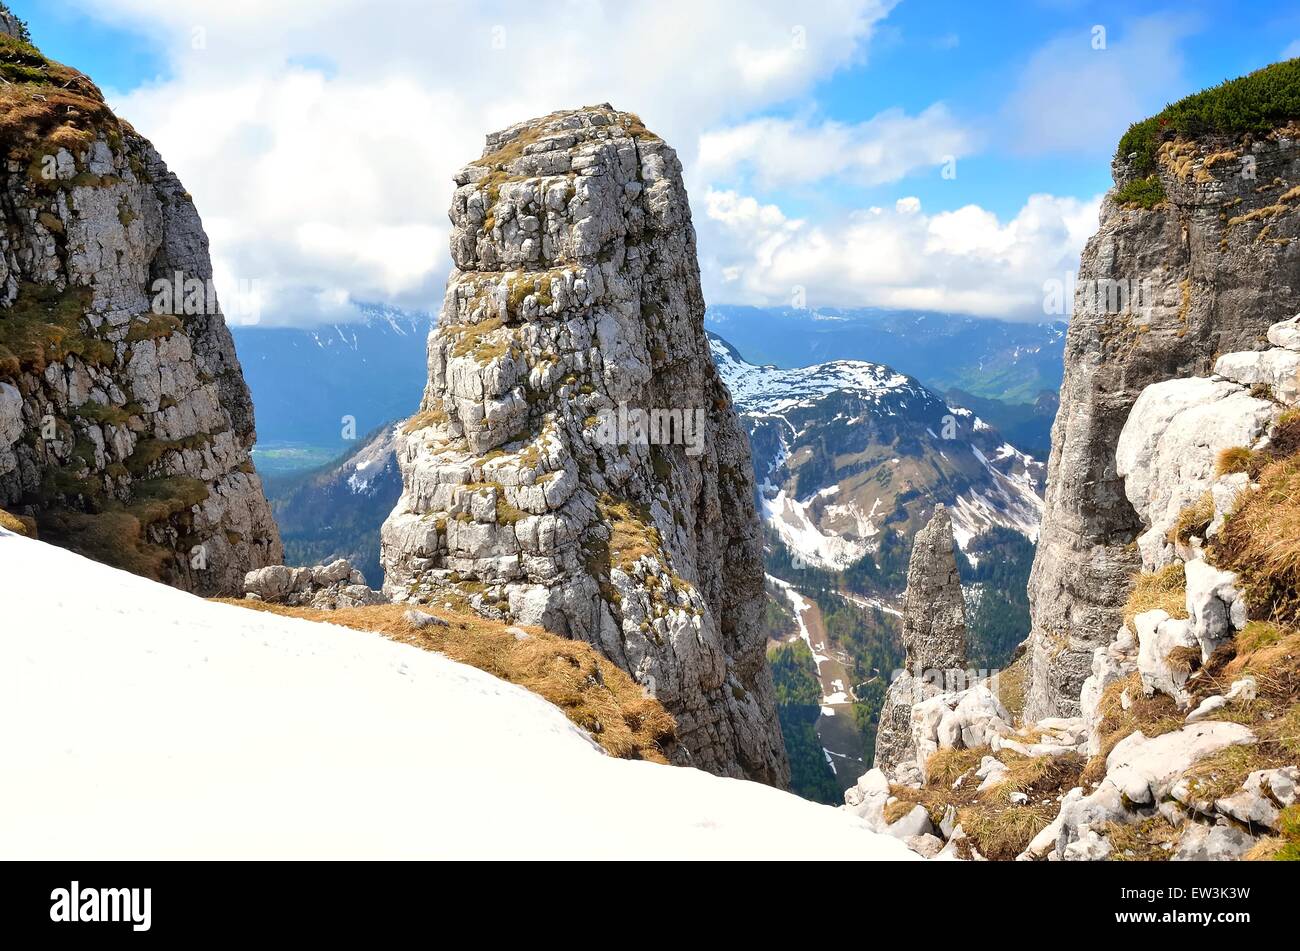 Mountain landscape. View from Loser peak over steep rocky wall in Dead Mountains (Totes Gebirge) group of mountains in Austria. Stock Photo